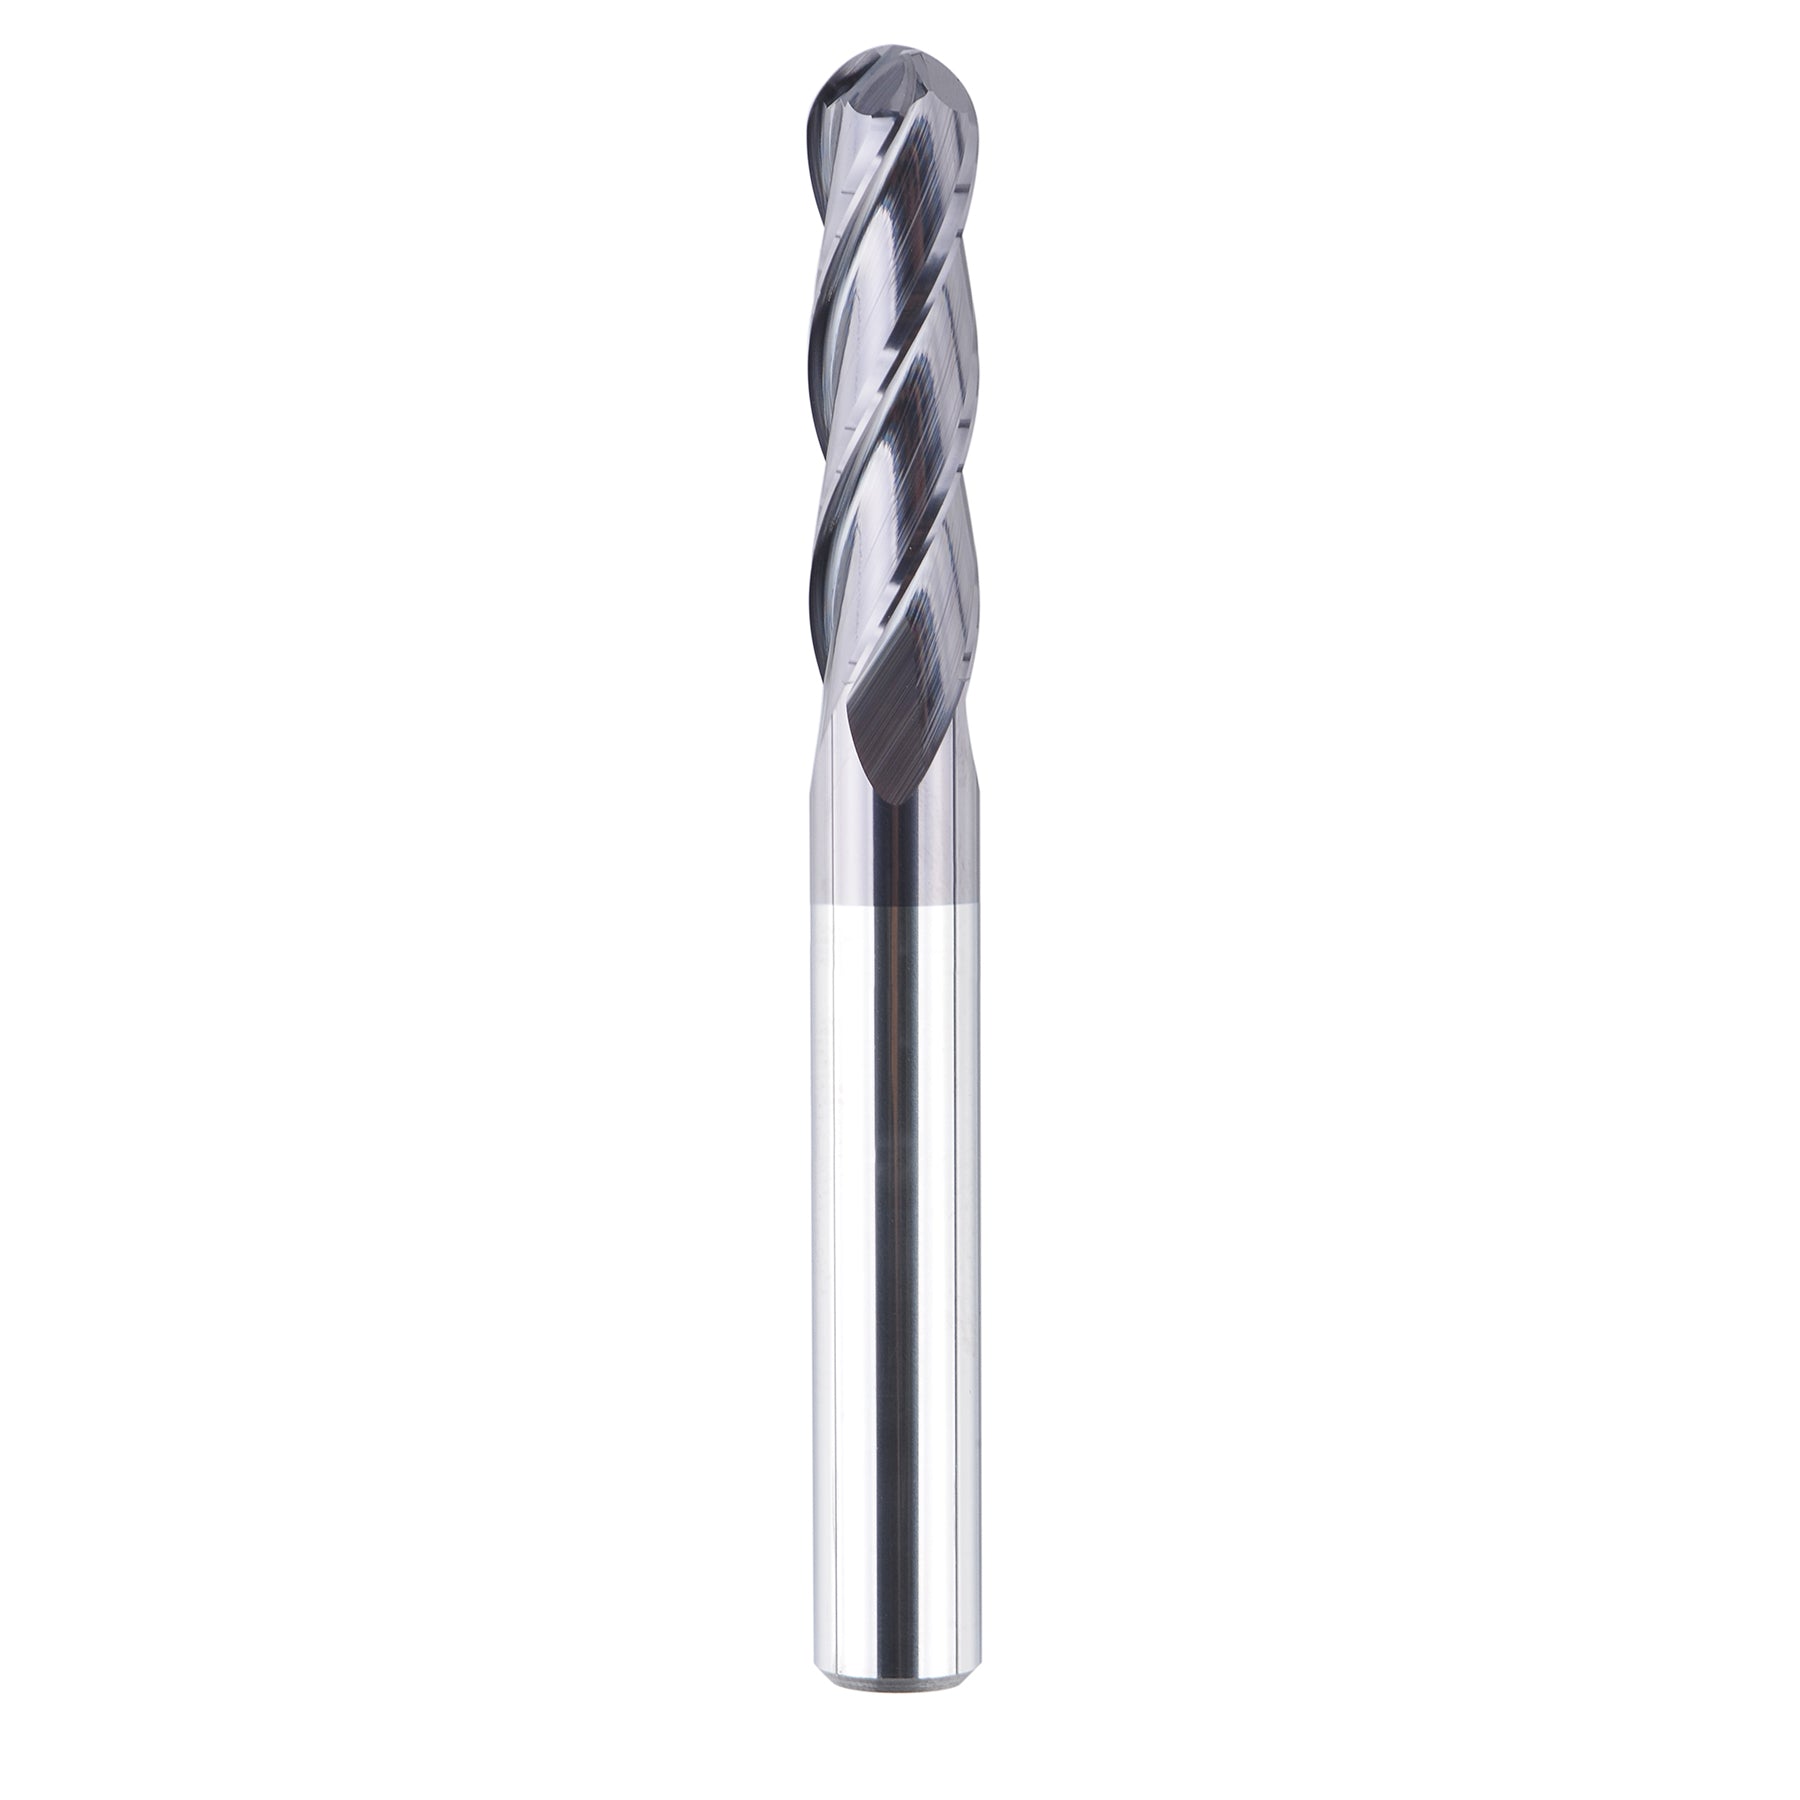 !Discontinued: SpeTool M05005 4 Flutes Carbide End Mill Ball Nose 5/16" CD x 5/16" SD x 1-1/8" CL Extra Long